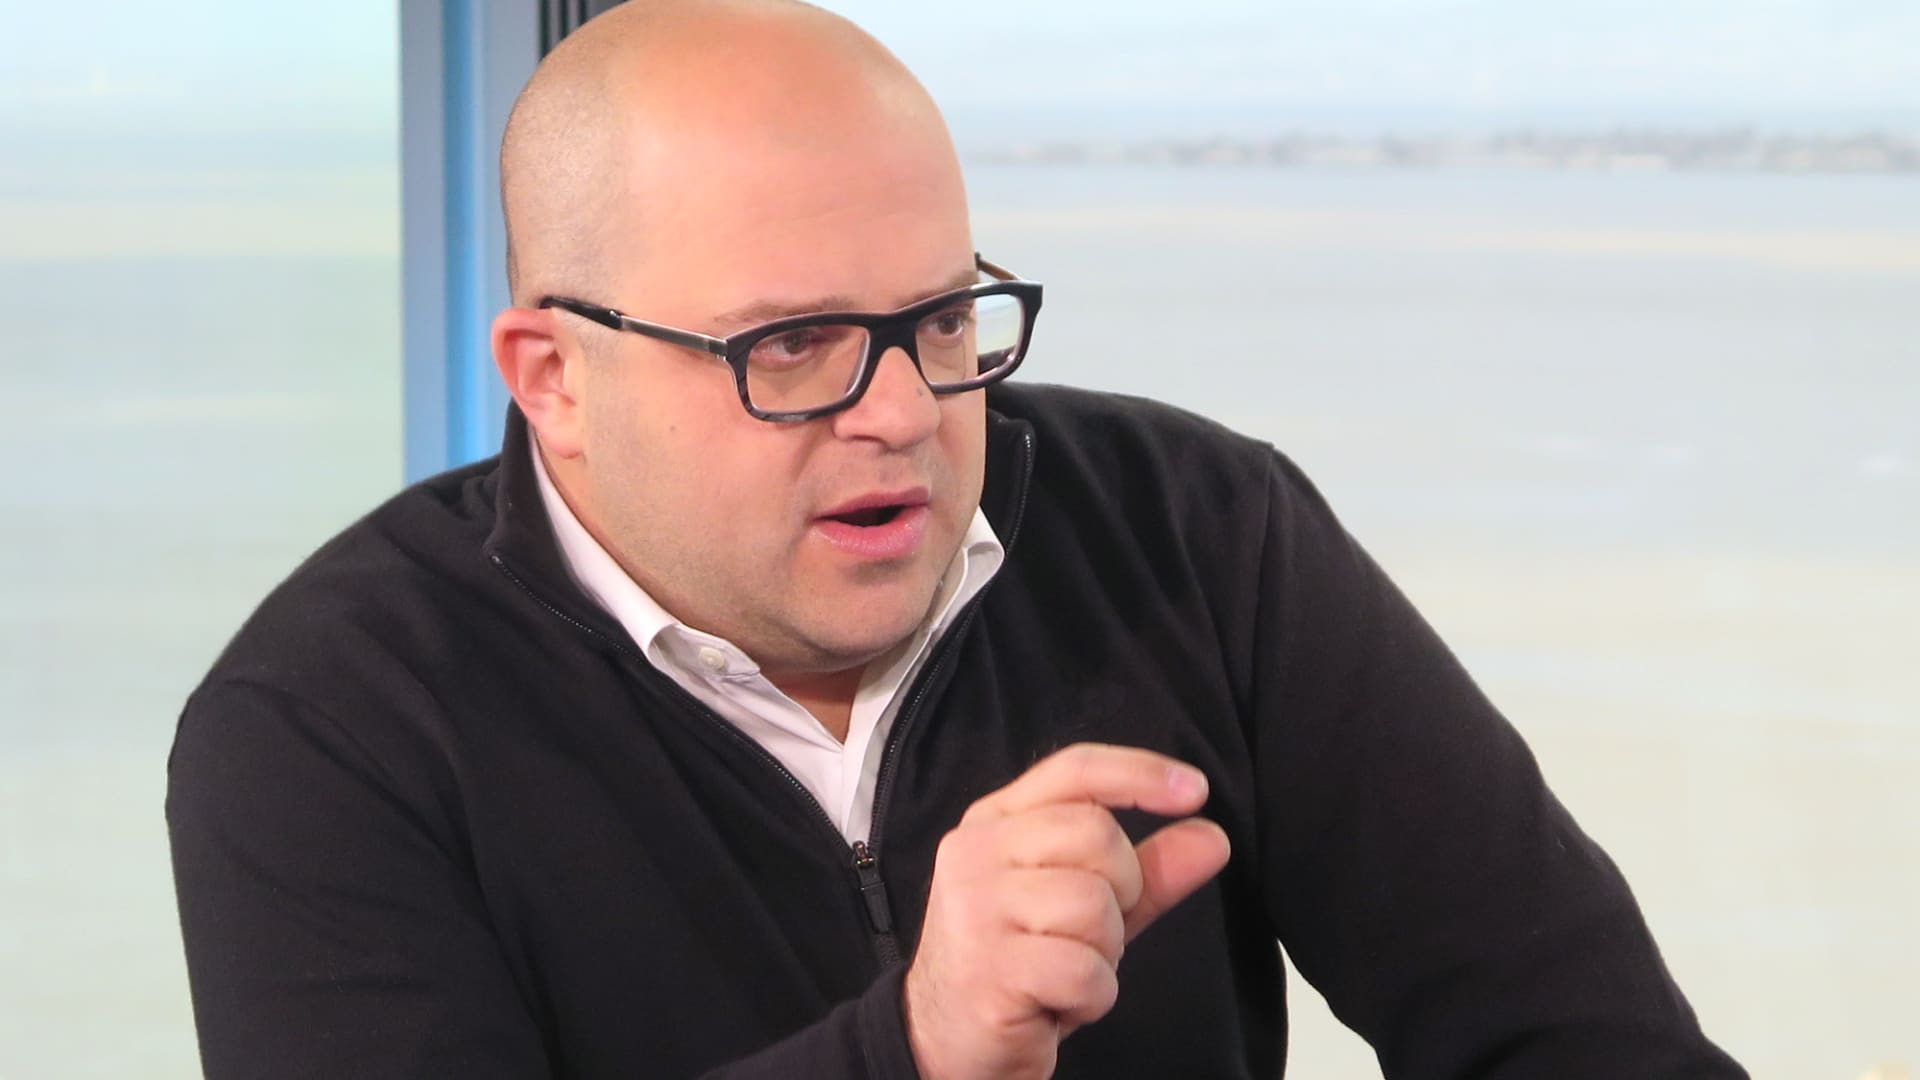 Twilio just spent $2 billion on a company that helps send mass emails